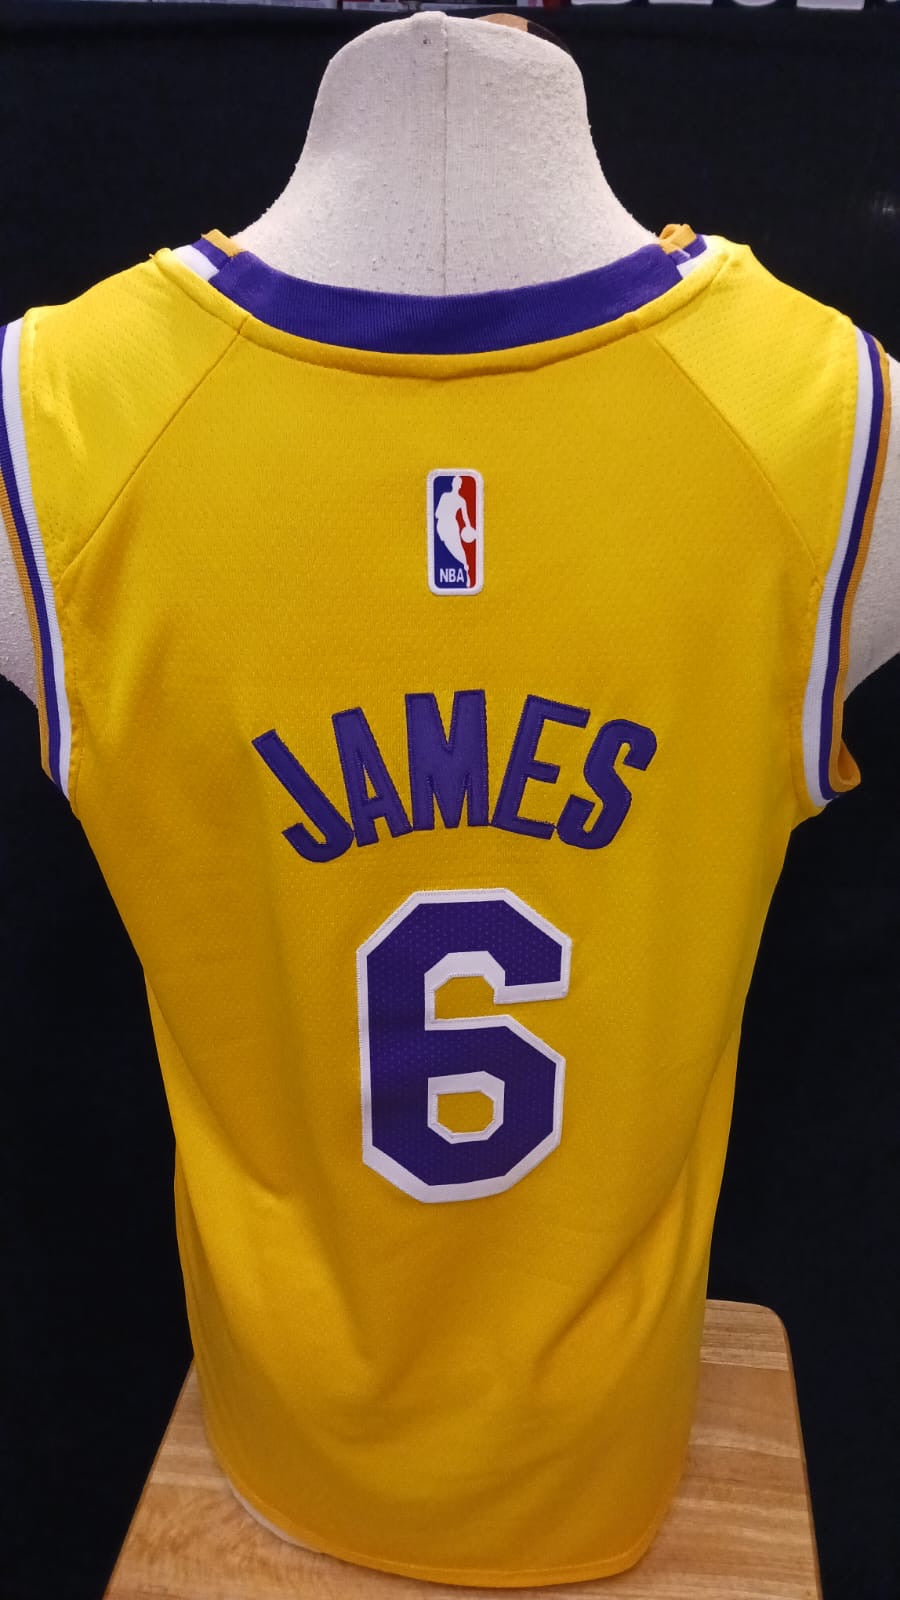 los angeles lakers jersey lebron james